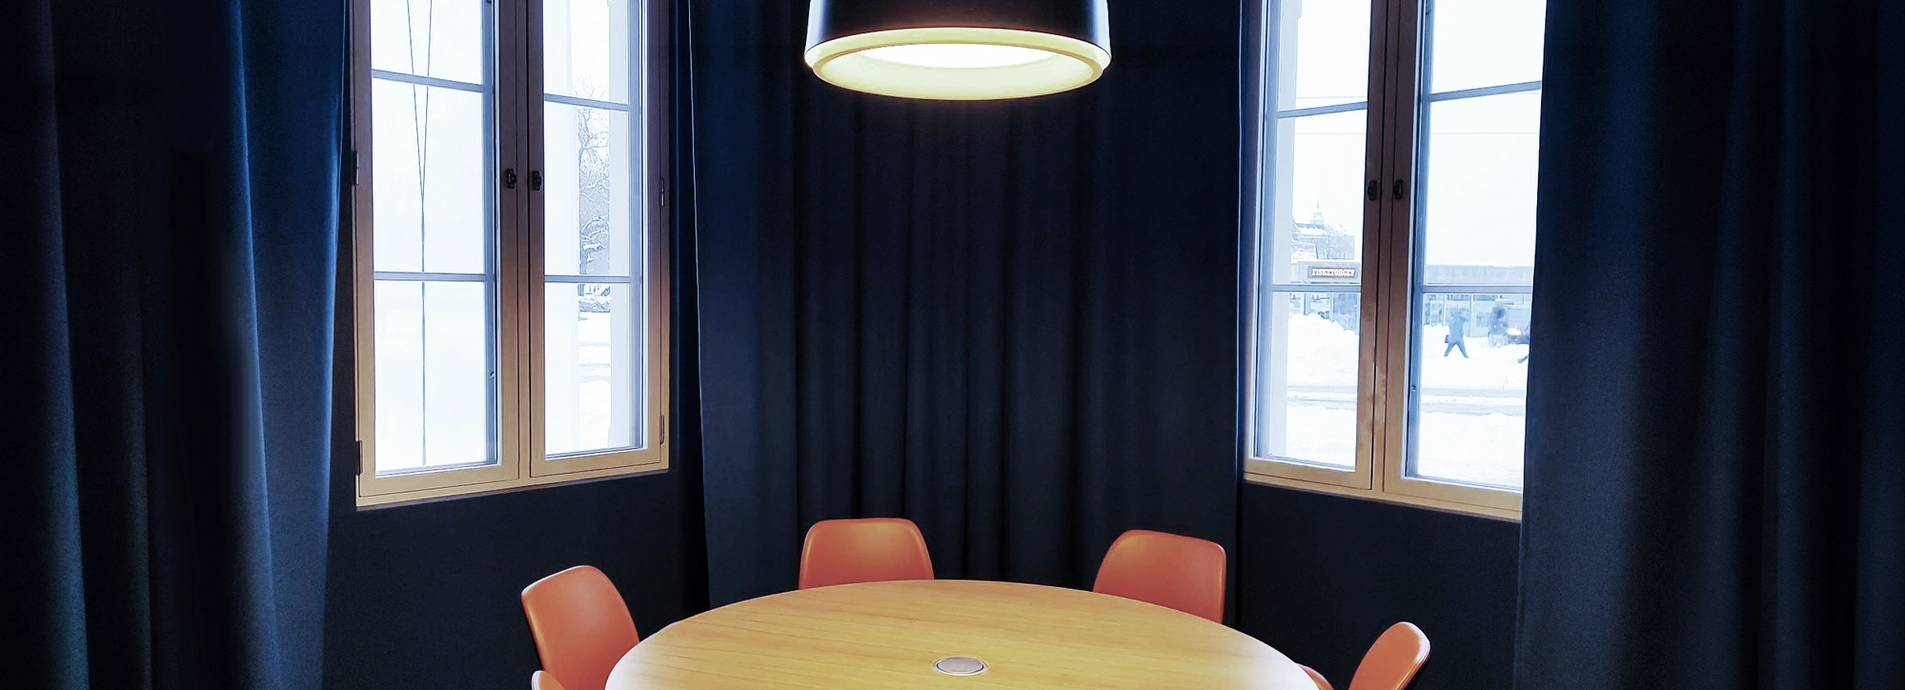 The meeting room Alfred, with 6 chairs surrounding a round table. The room is dark blue with dark blue modern curtains open to big light windows.